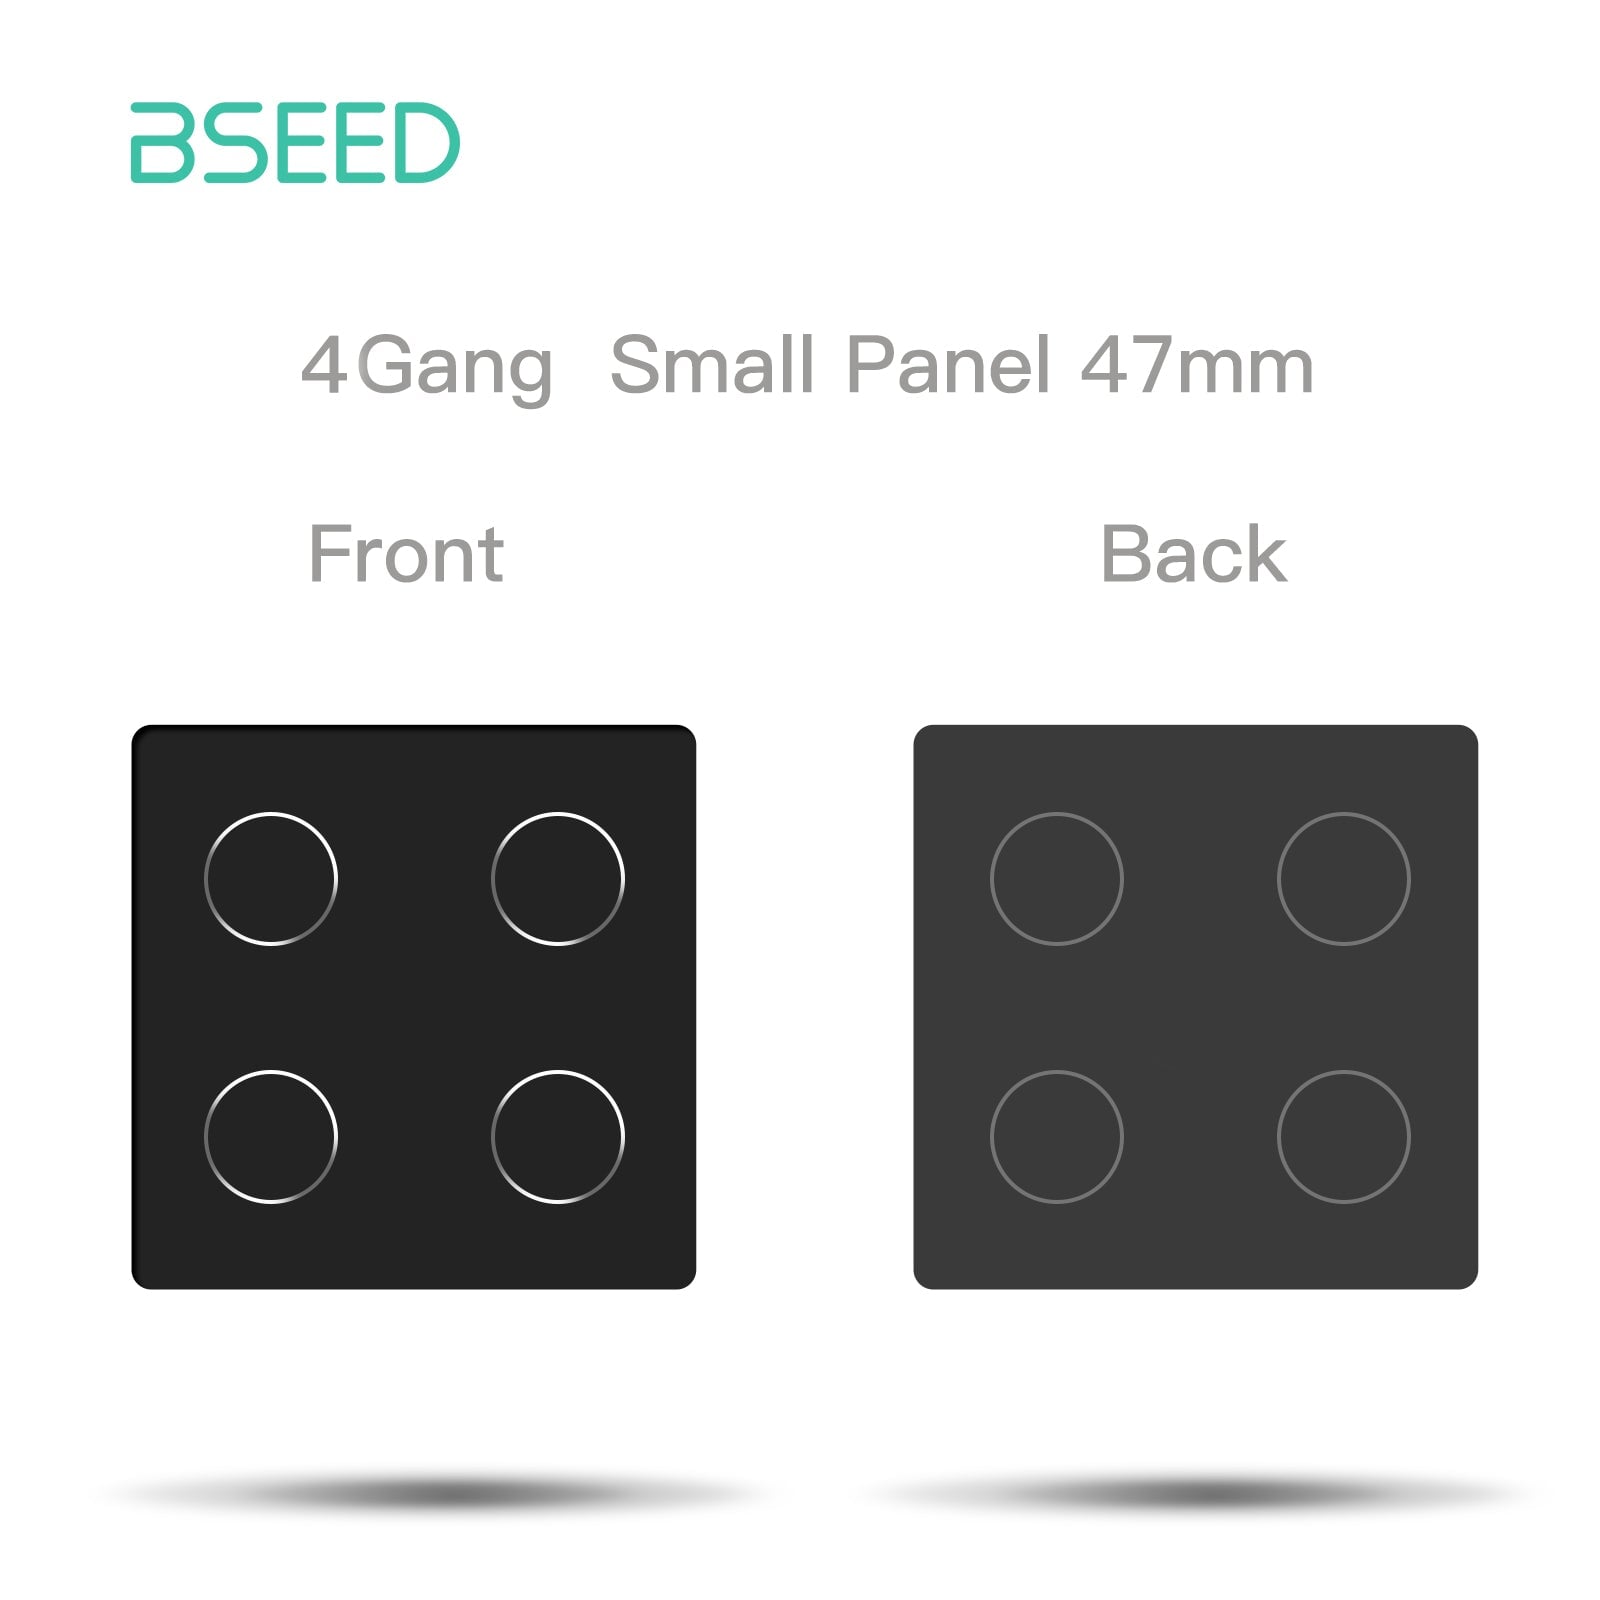 Bseed 47mm Glass Panel Switch DIY Part With Or Without Icon Bseedswitch Black Touch 4Gang Switch icon Panel 